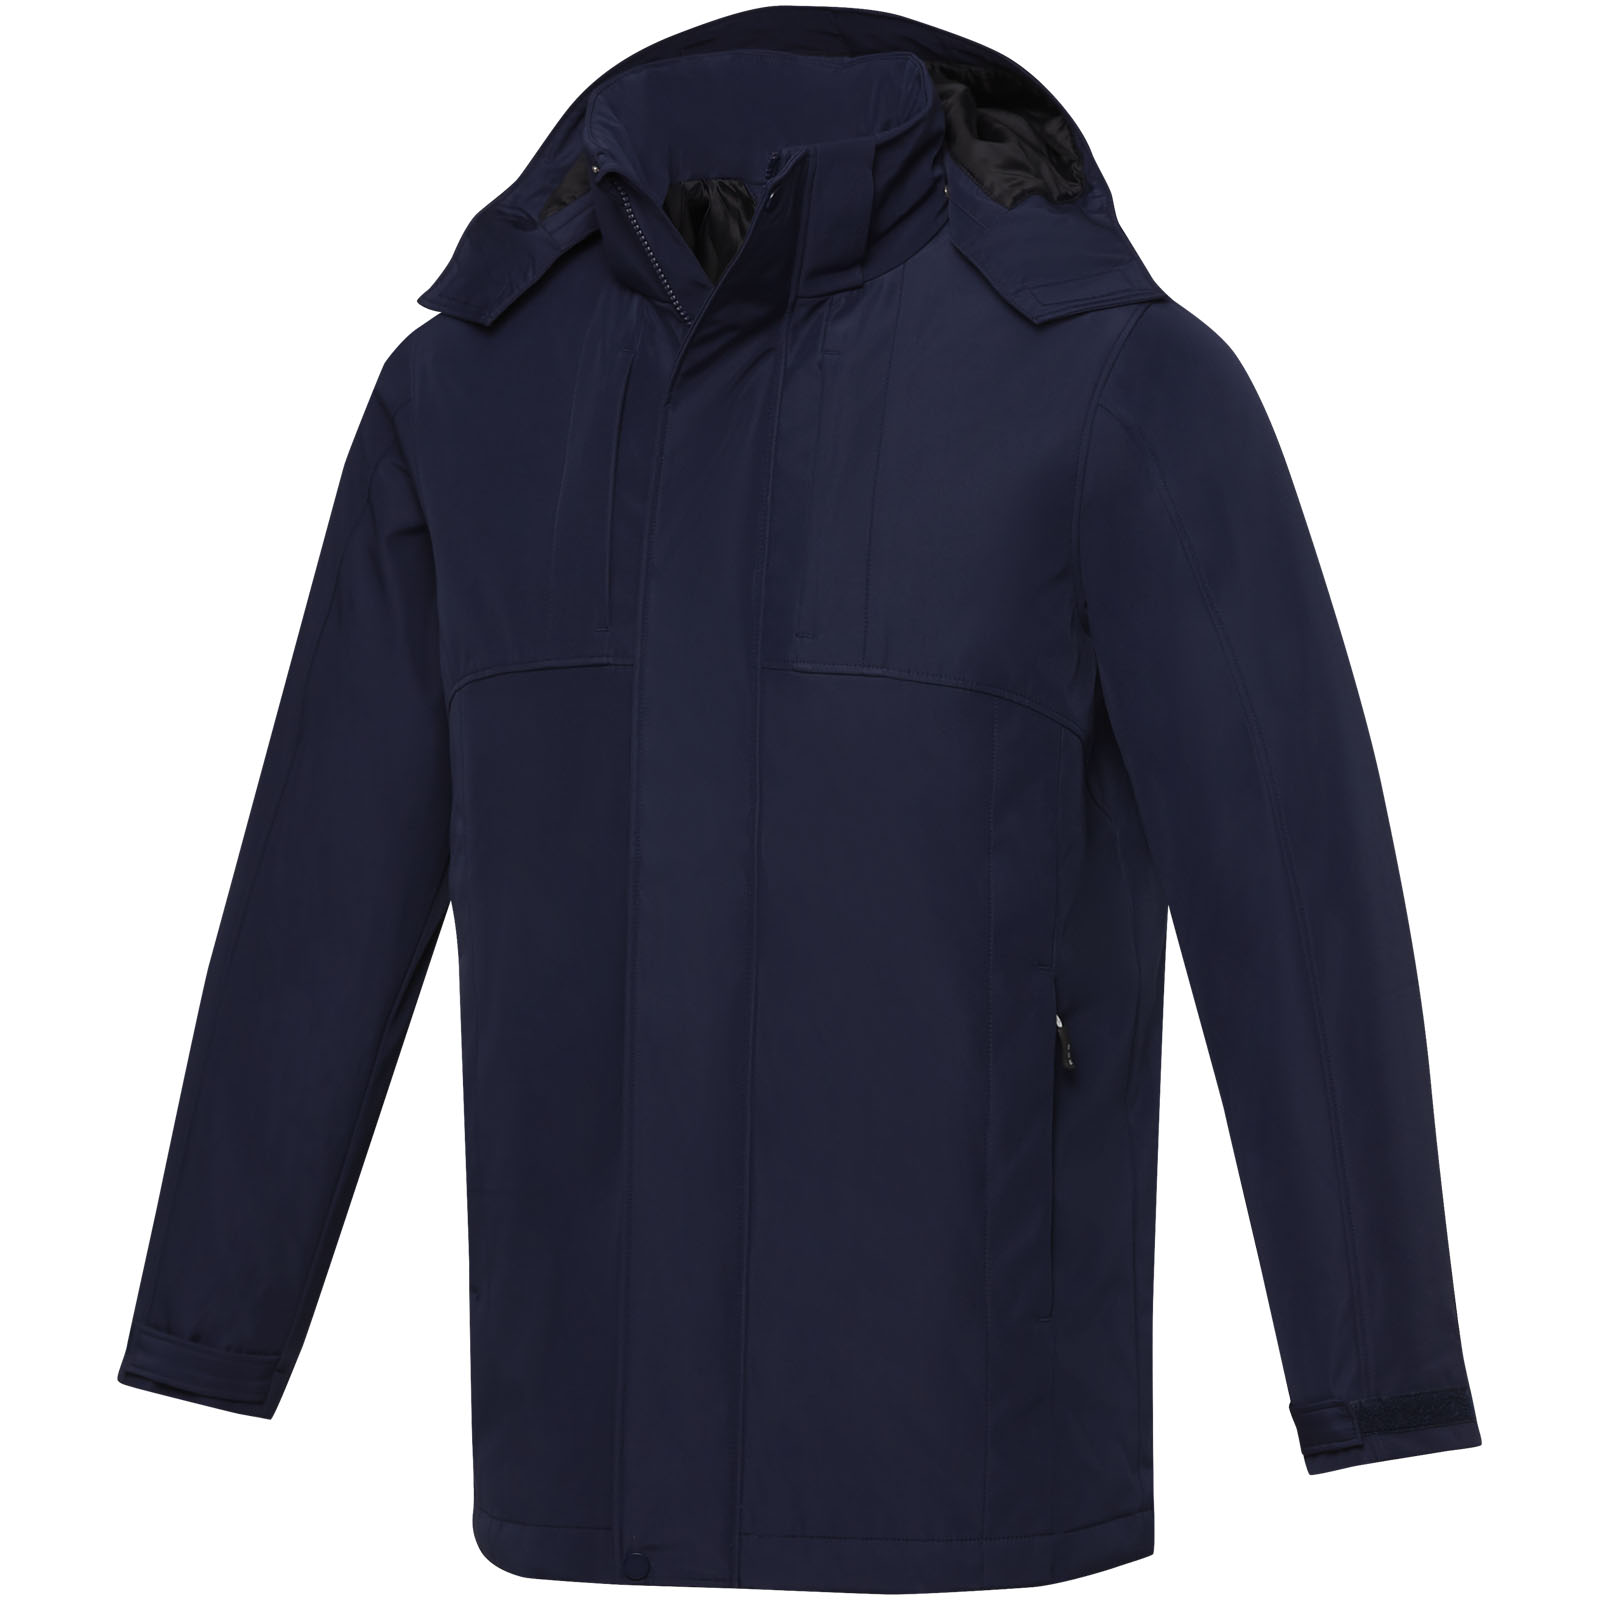 Advertising Jackets - Hardy men's insulated parka